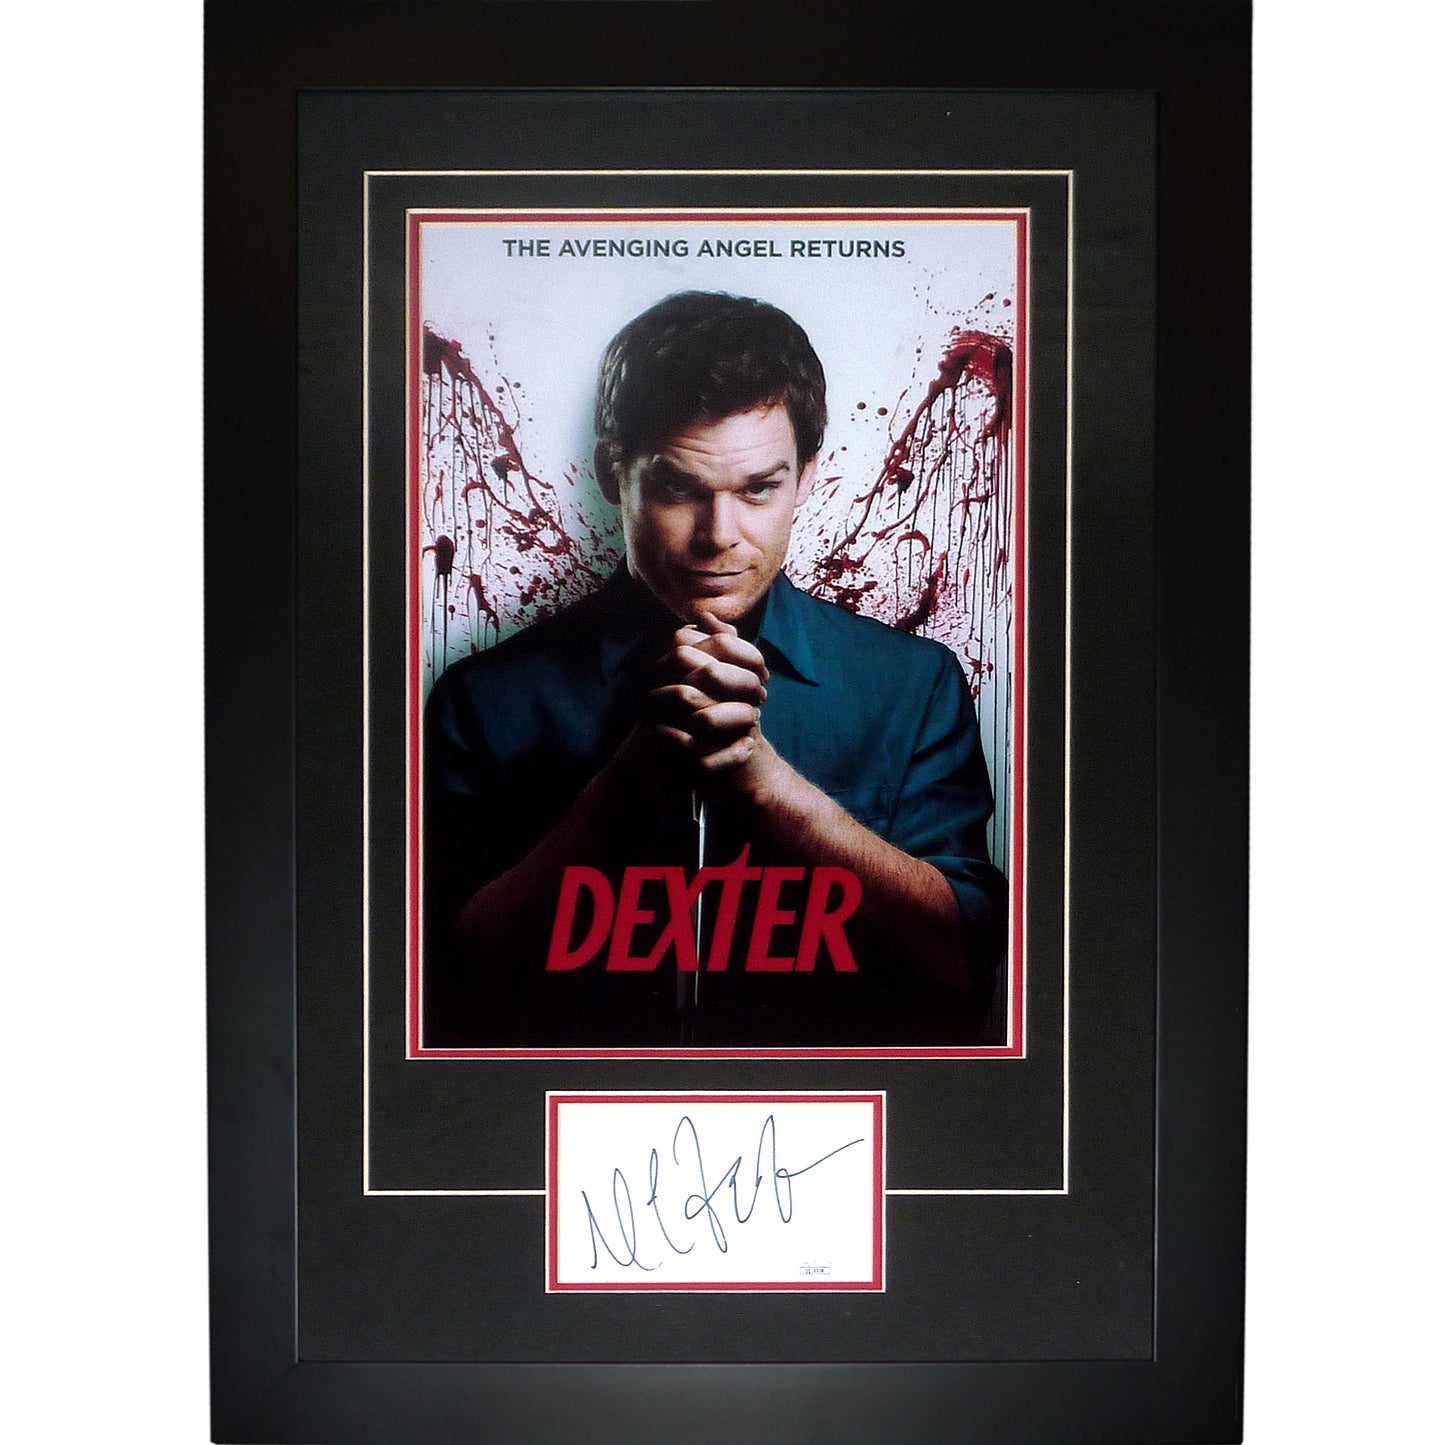 Dexter 11x17 TV Poster Deluxe Framed with Michael C Hall Autograph - JSA